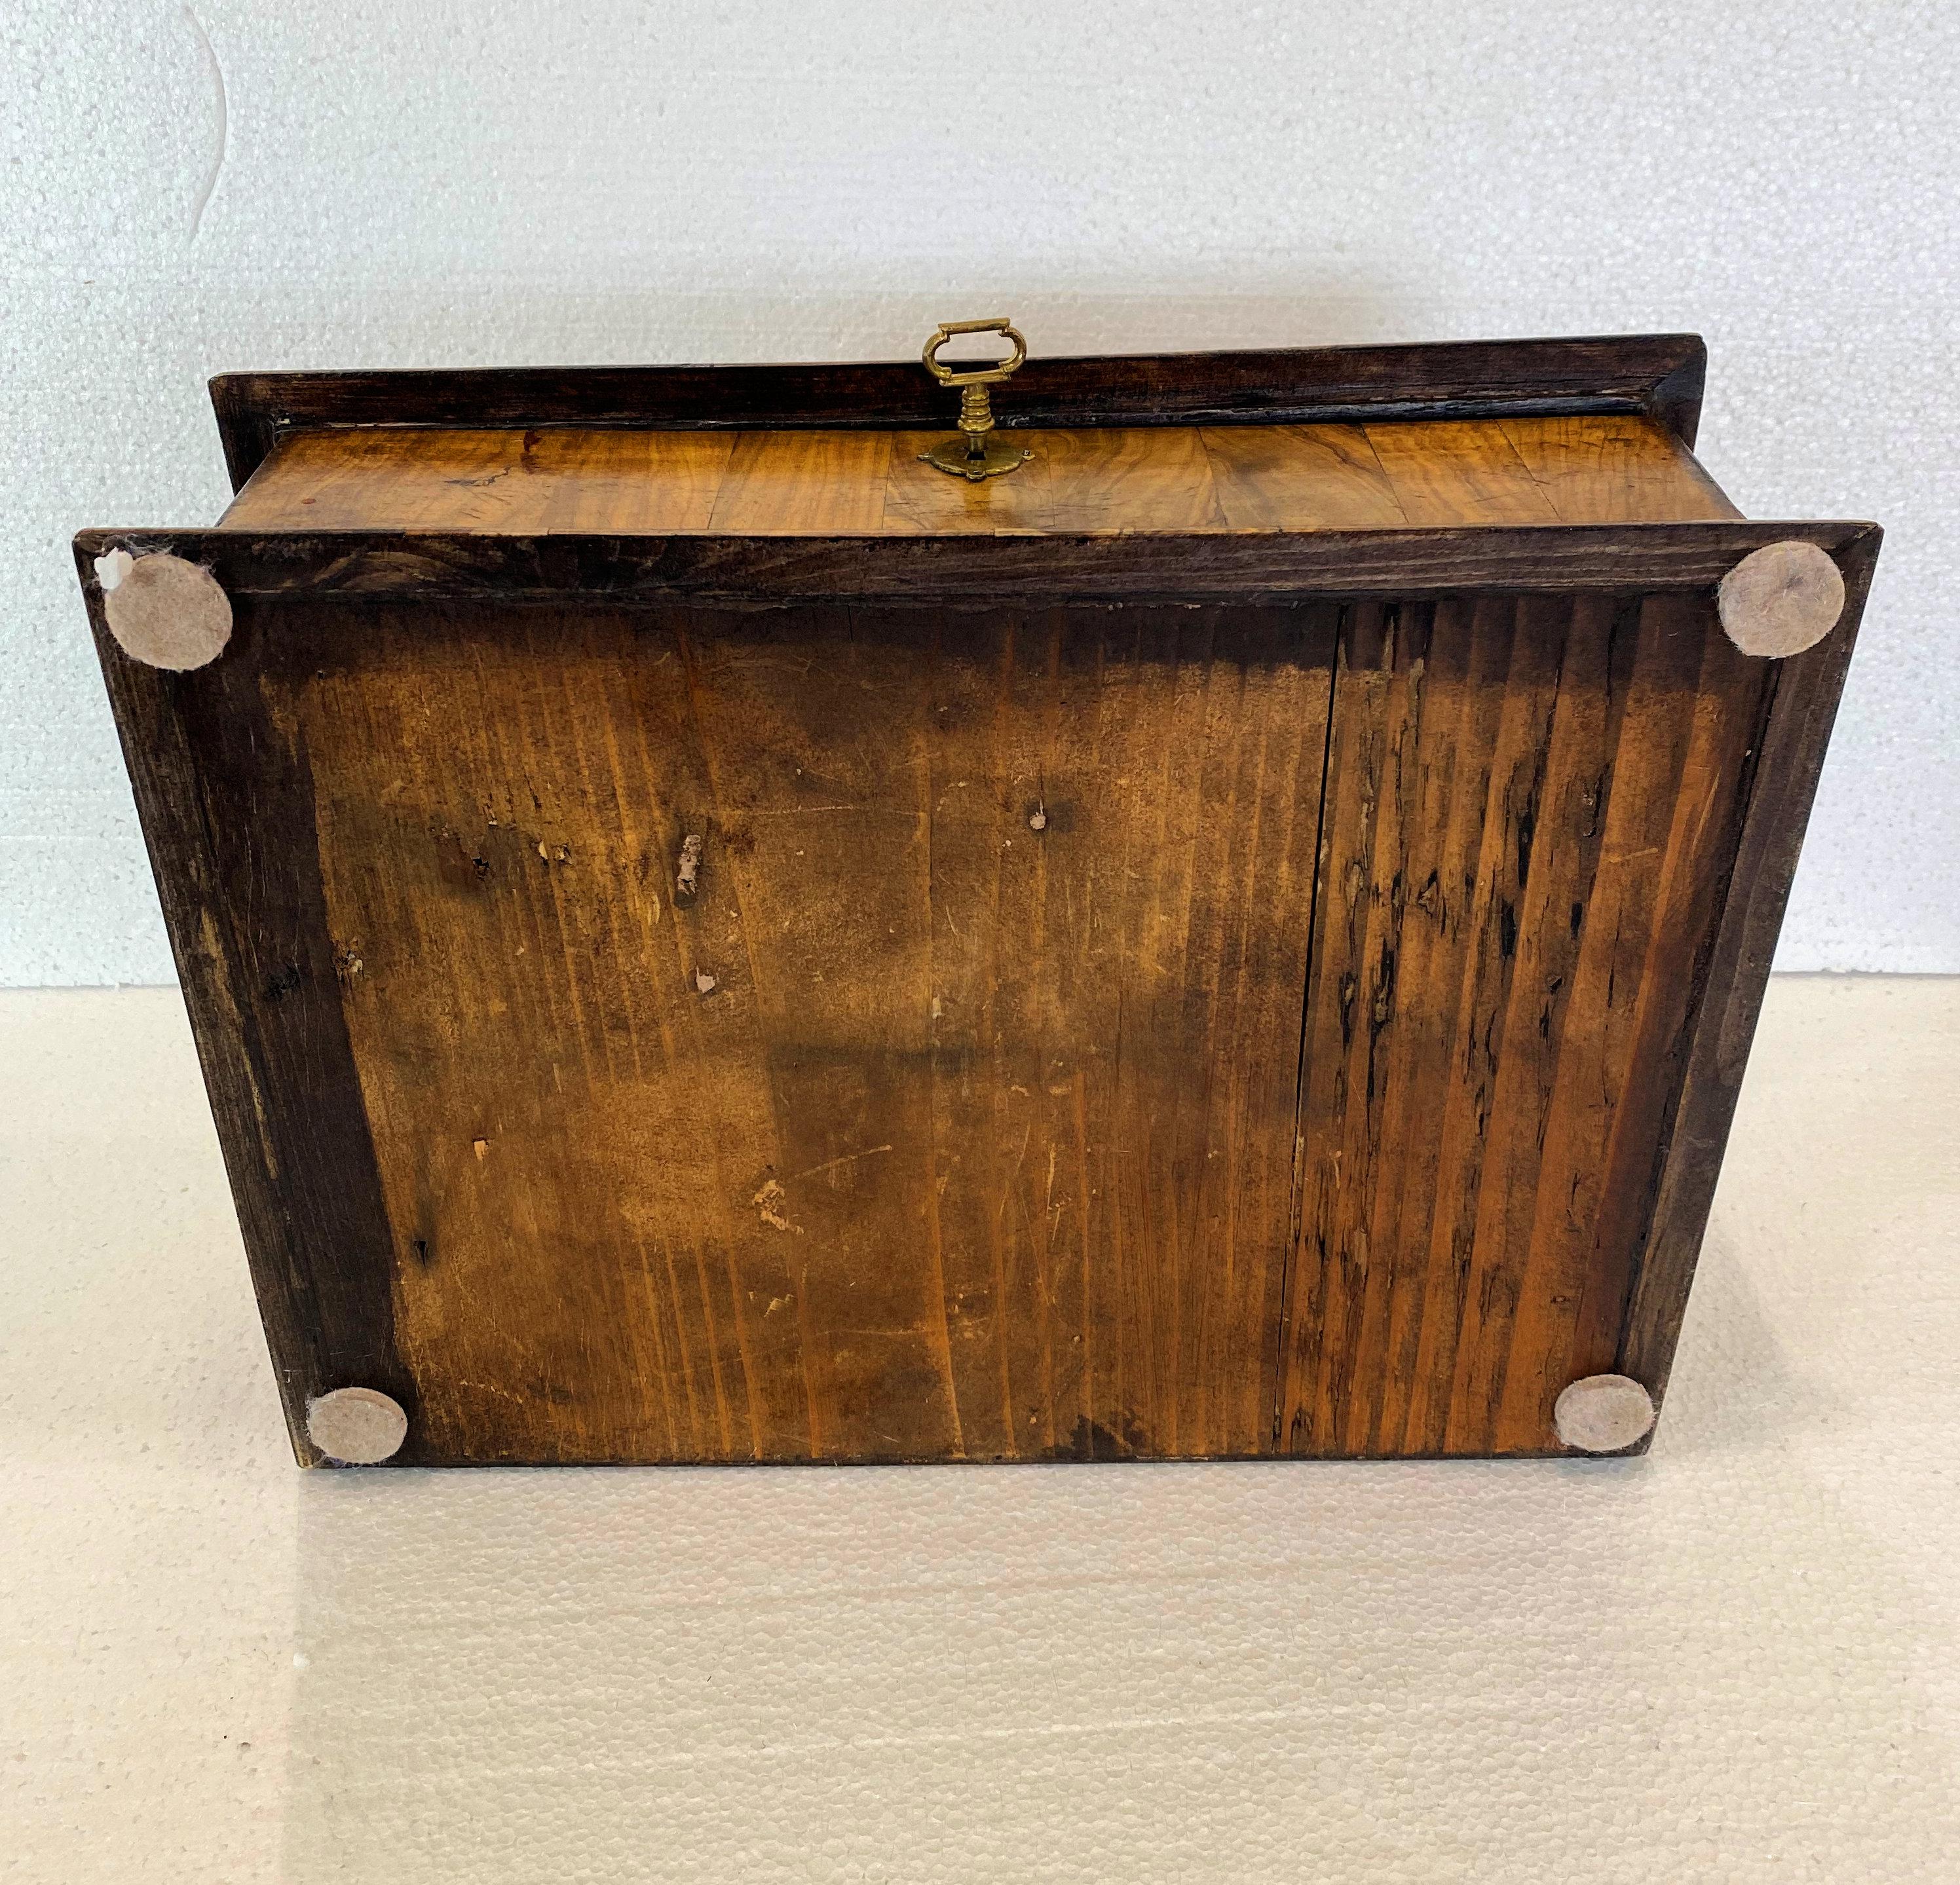 This beautiful and very handsome William and Mary Style lace box was designed from old oak timber and then sympathetically covered in an olive oyster veneer. The box would have originally been used to house lace, however, it would make an